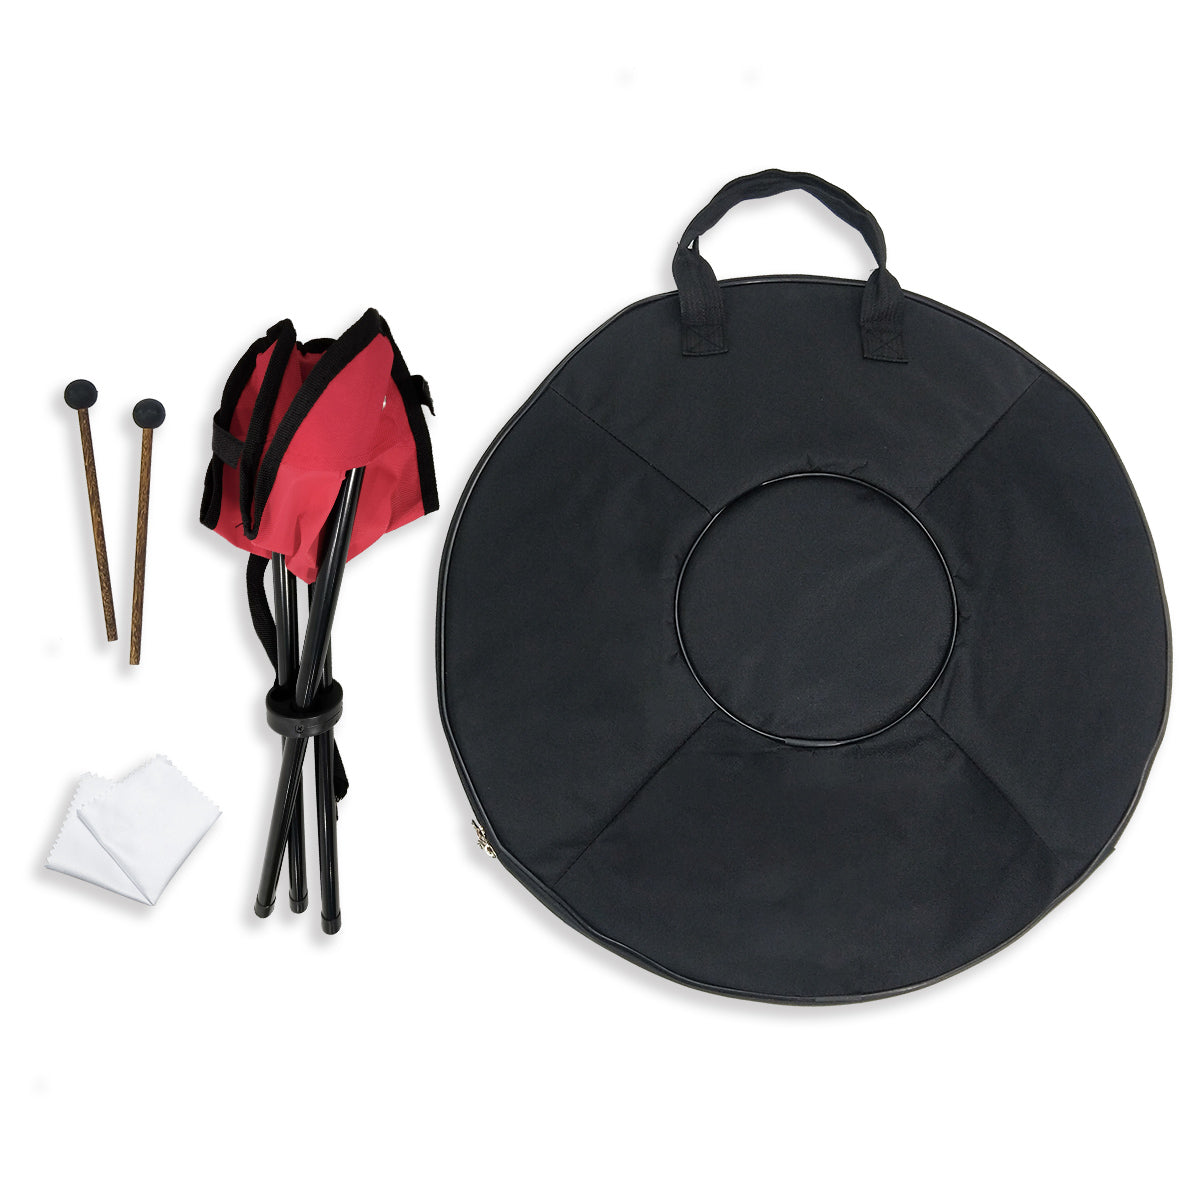 Tak Drum Handpan Performer 17 Notes D Minor Scale Hangdrum with gift set